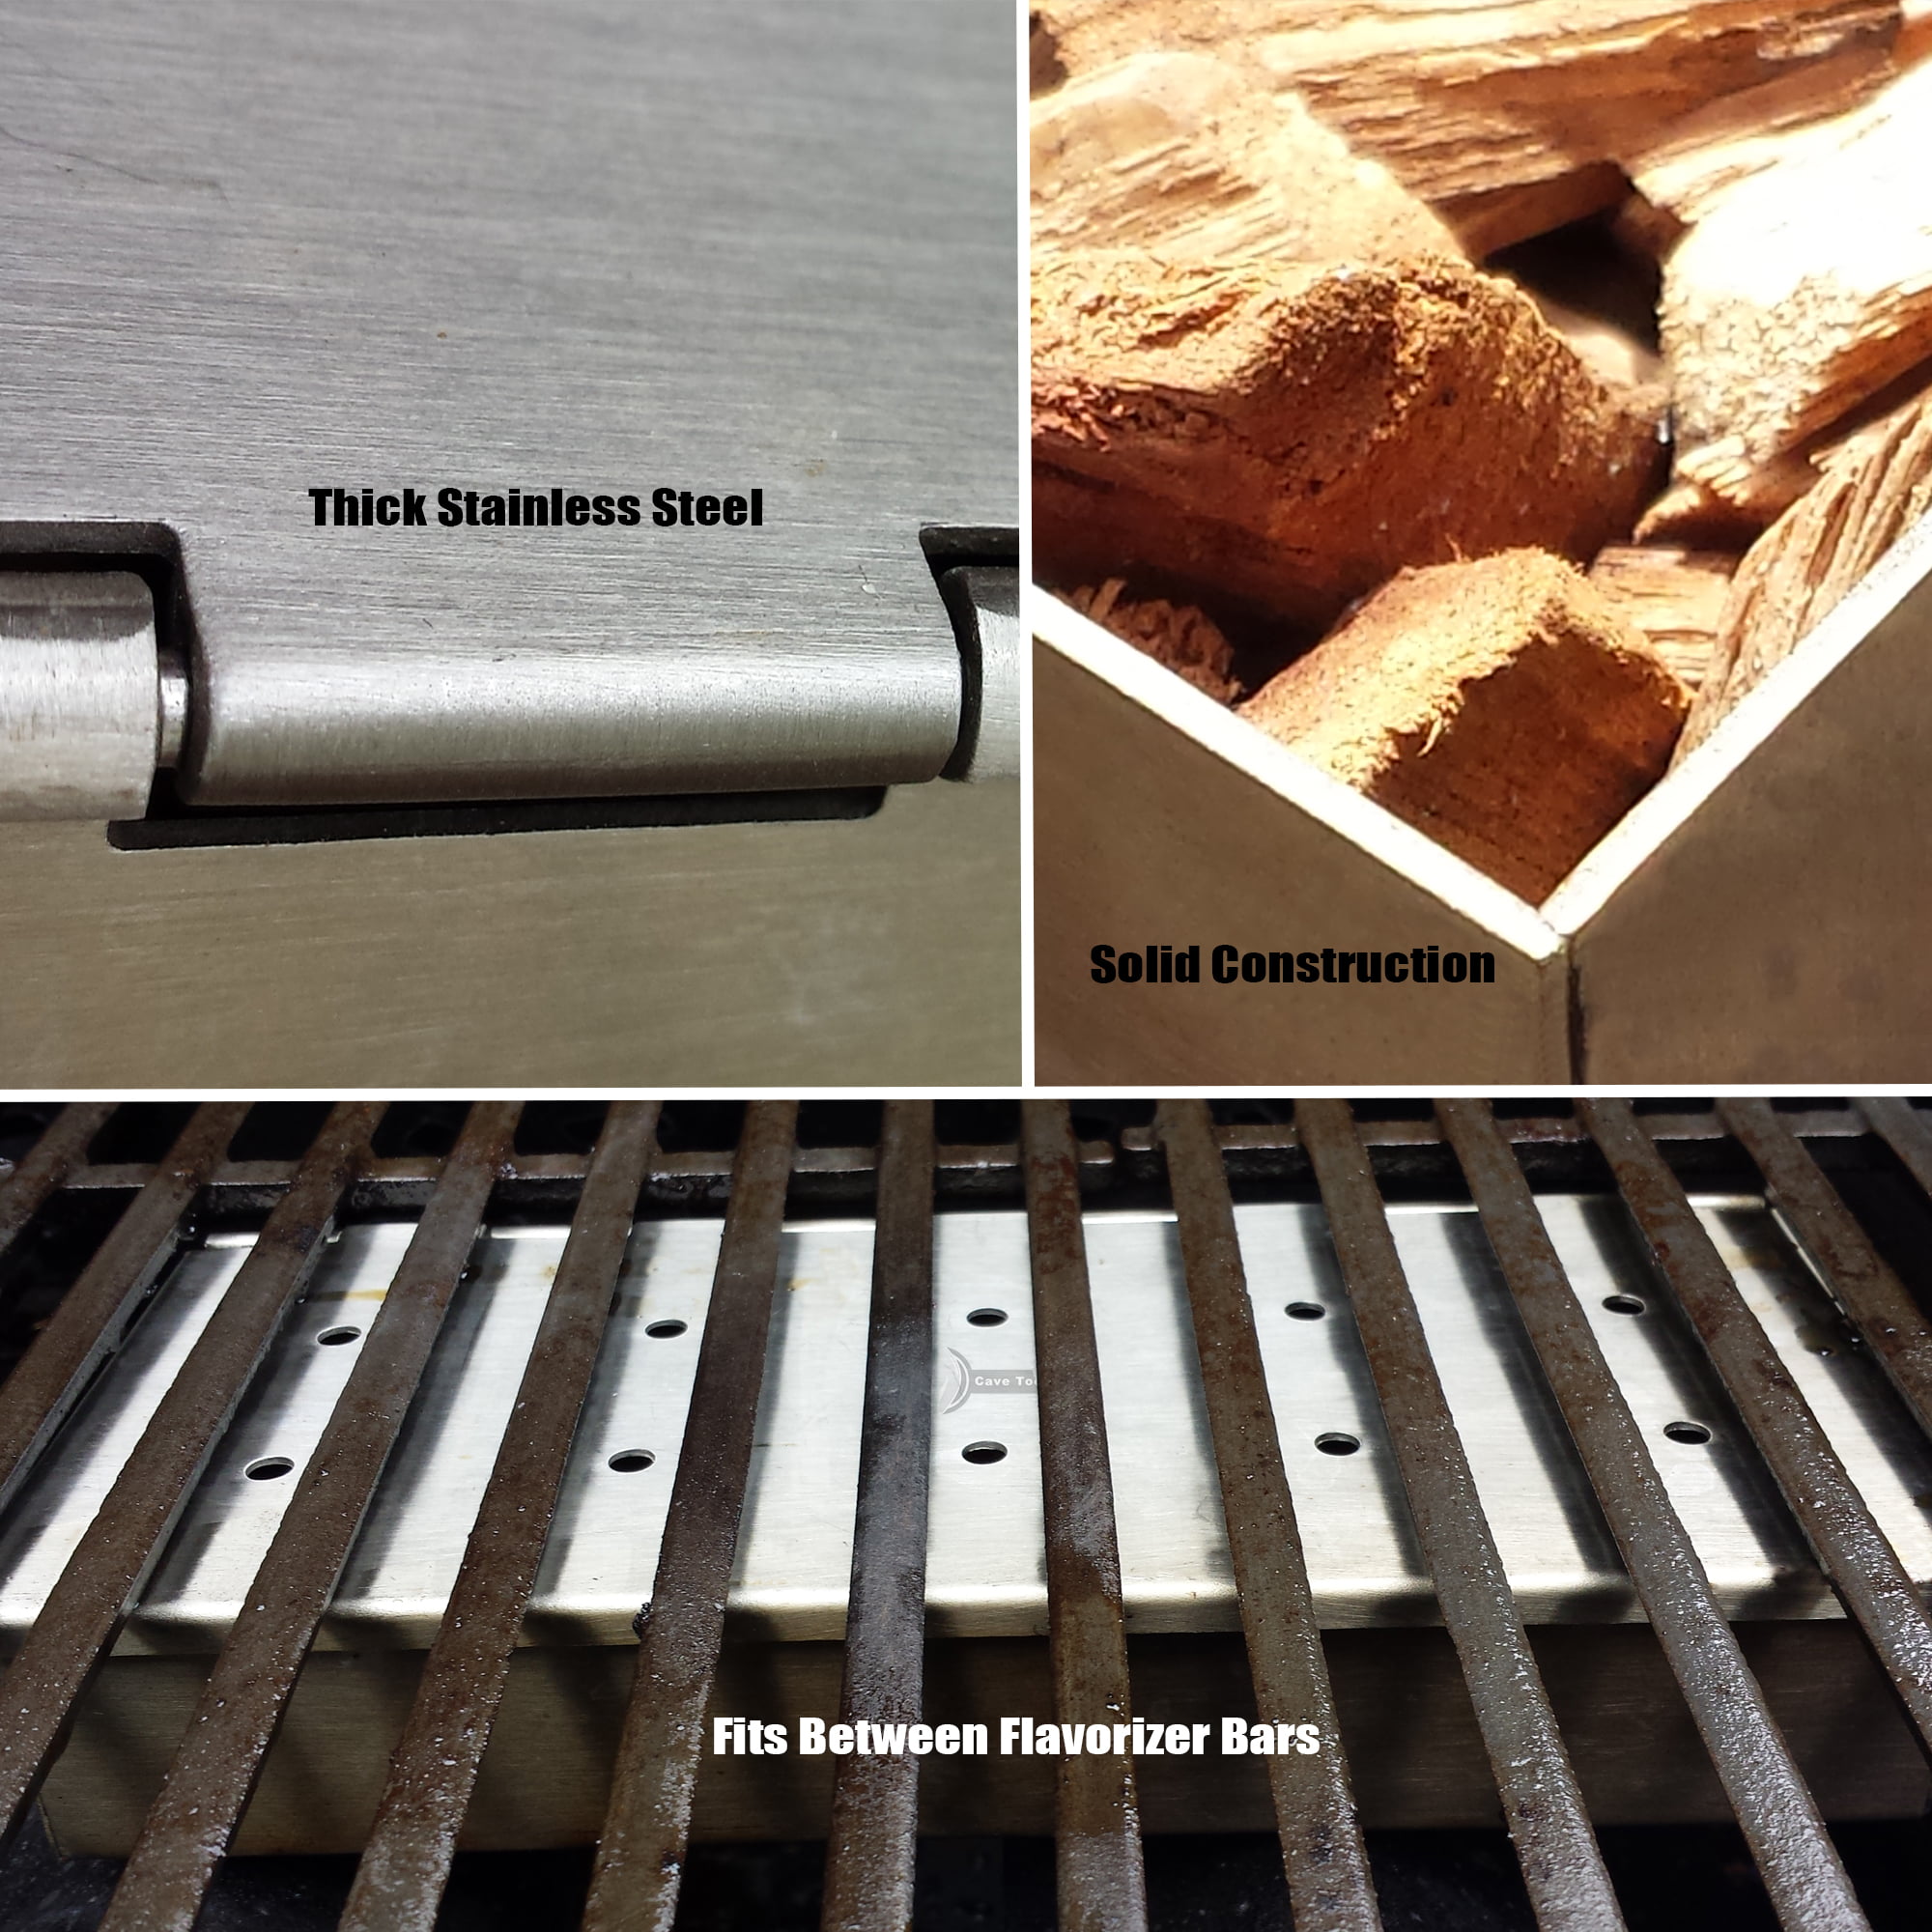 Cave Tools Smoker Box for BBQ Grill Wood Chips - Stainless Steel - Compact size, Silver